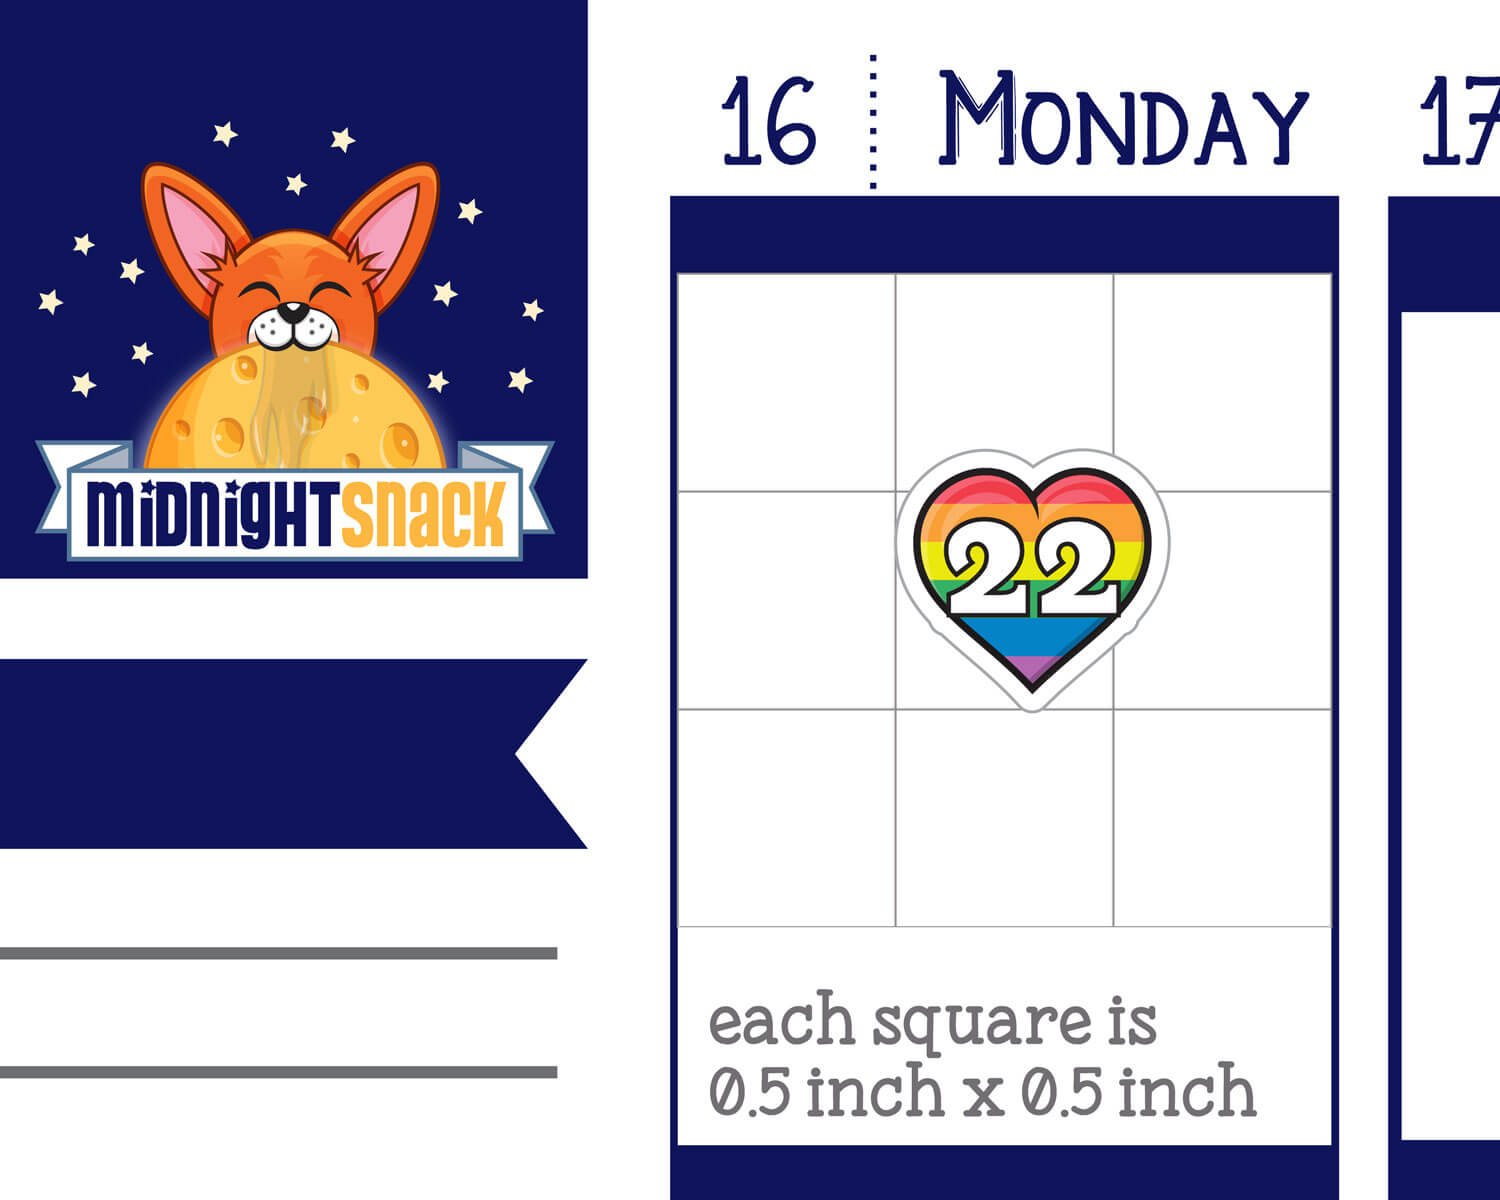 Pride Month Date Cover Planner Stickers from Midnight Snack Planner